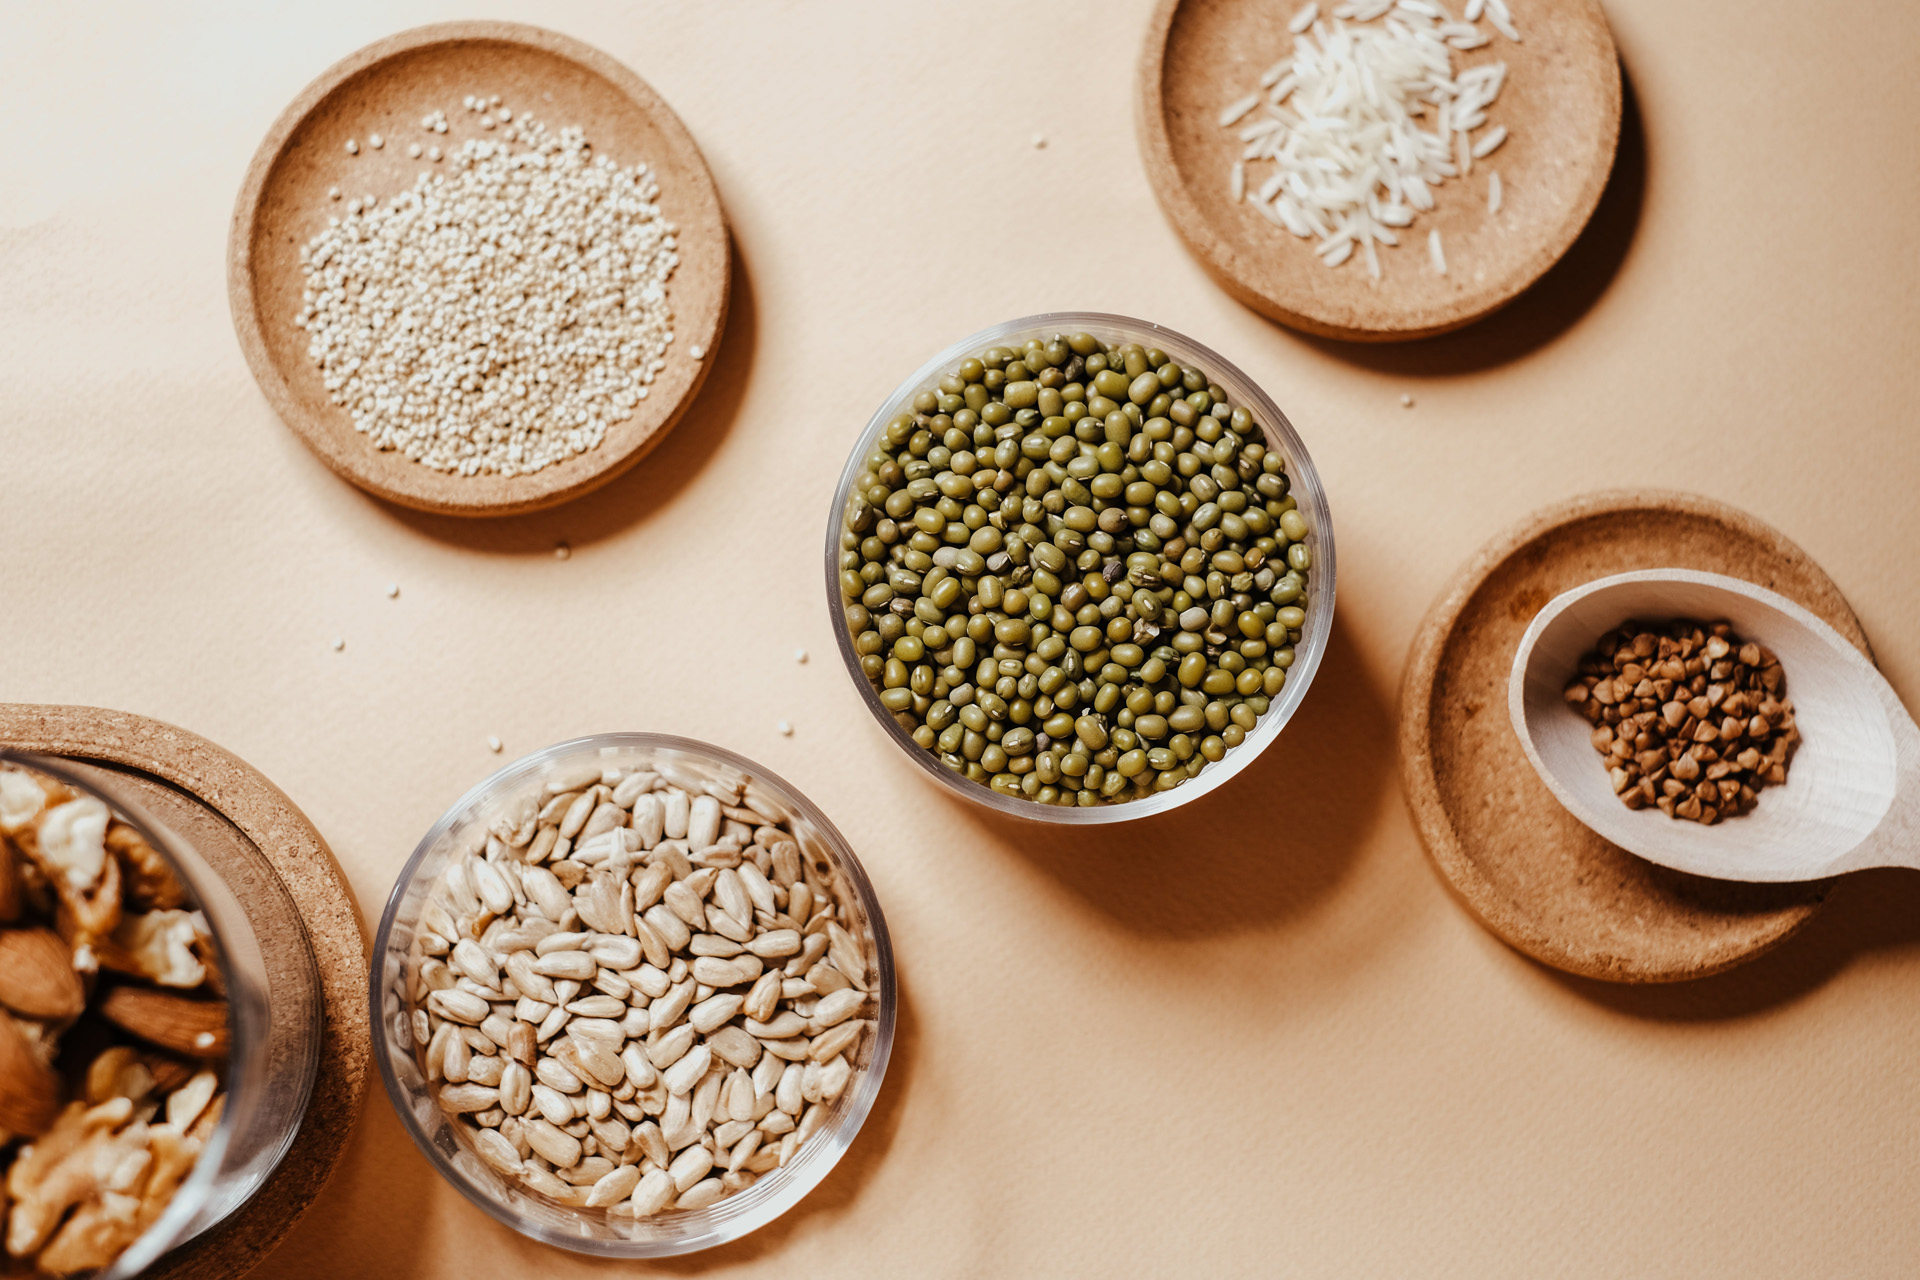 Grains and pulses are a good source of Amino Acids